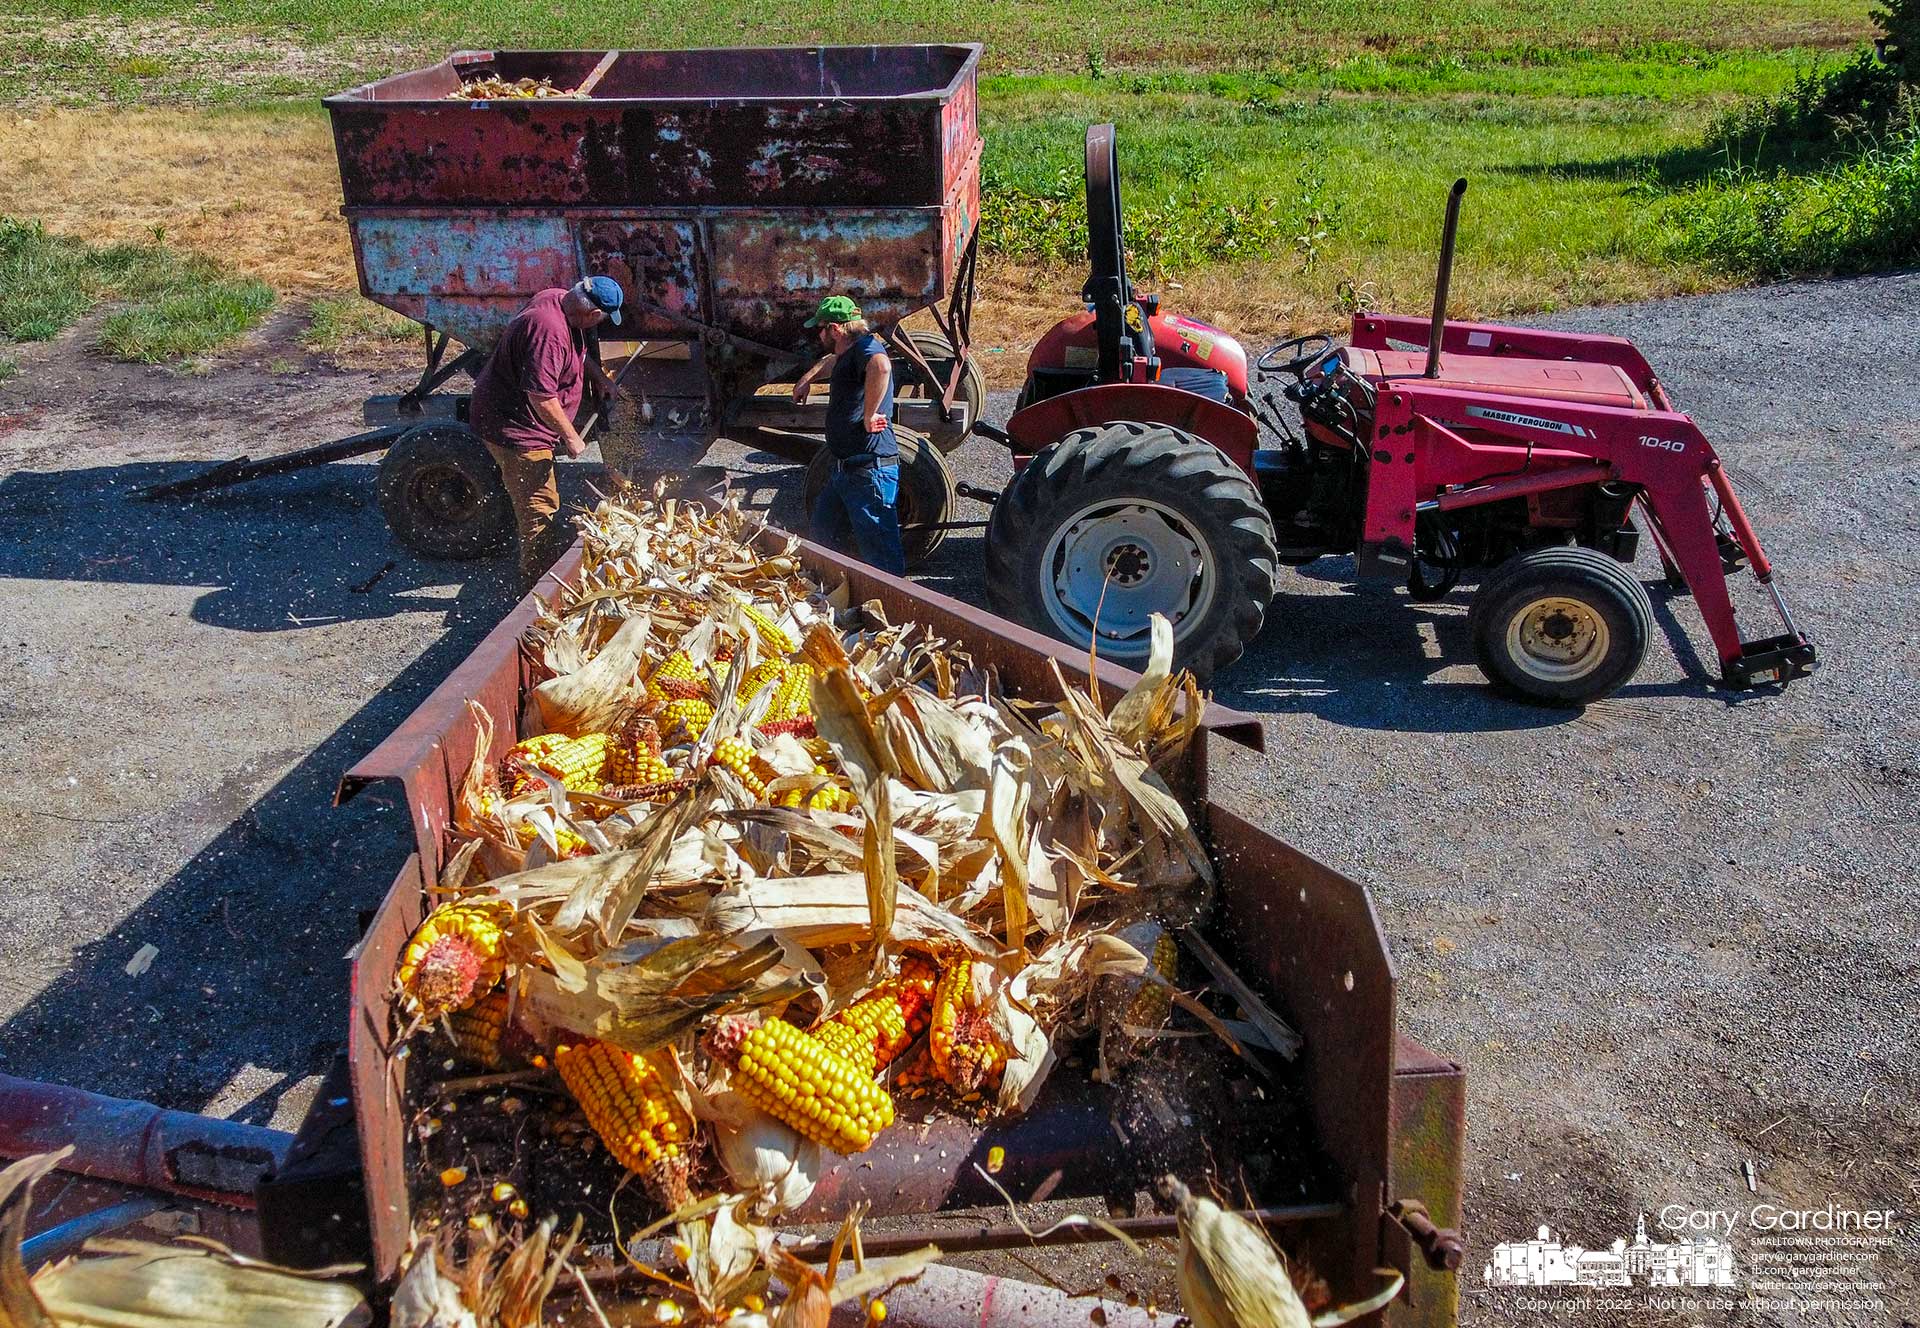 Corn is transferred from storage in a harvest wagon to a wagon for transport as farmers clear the barn at the Braun Farm preparing for another harvest. My Final Photo for July 13, 2022.